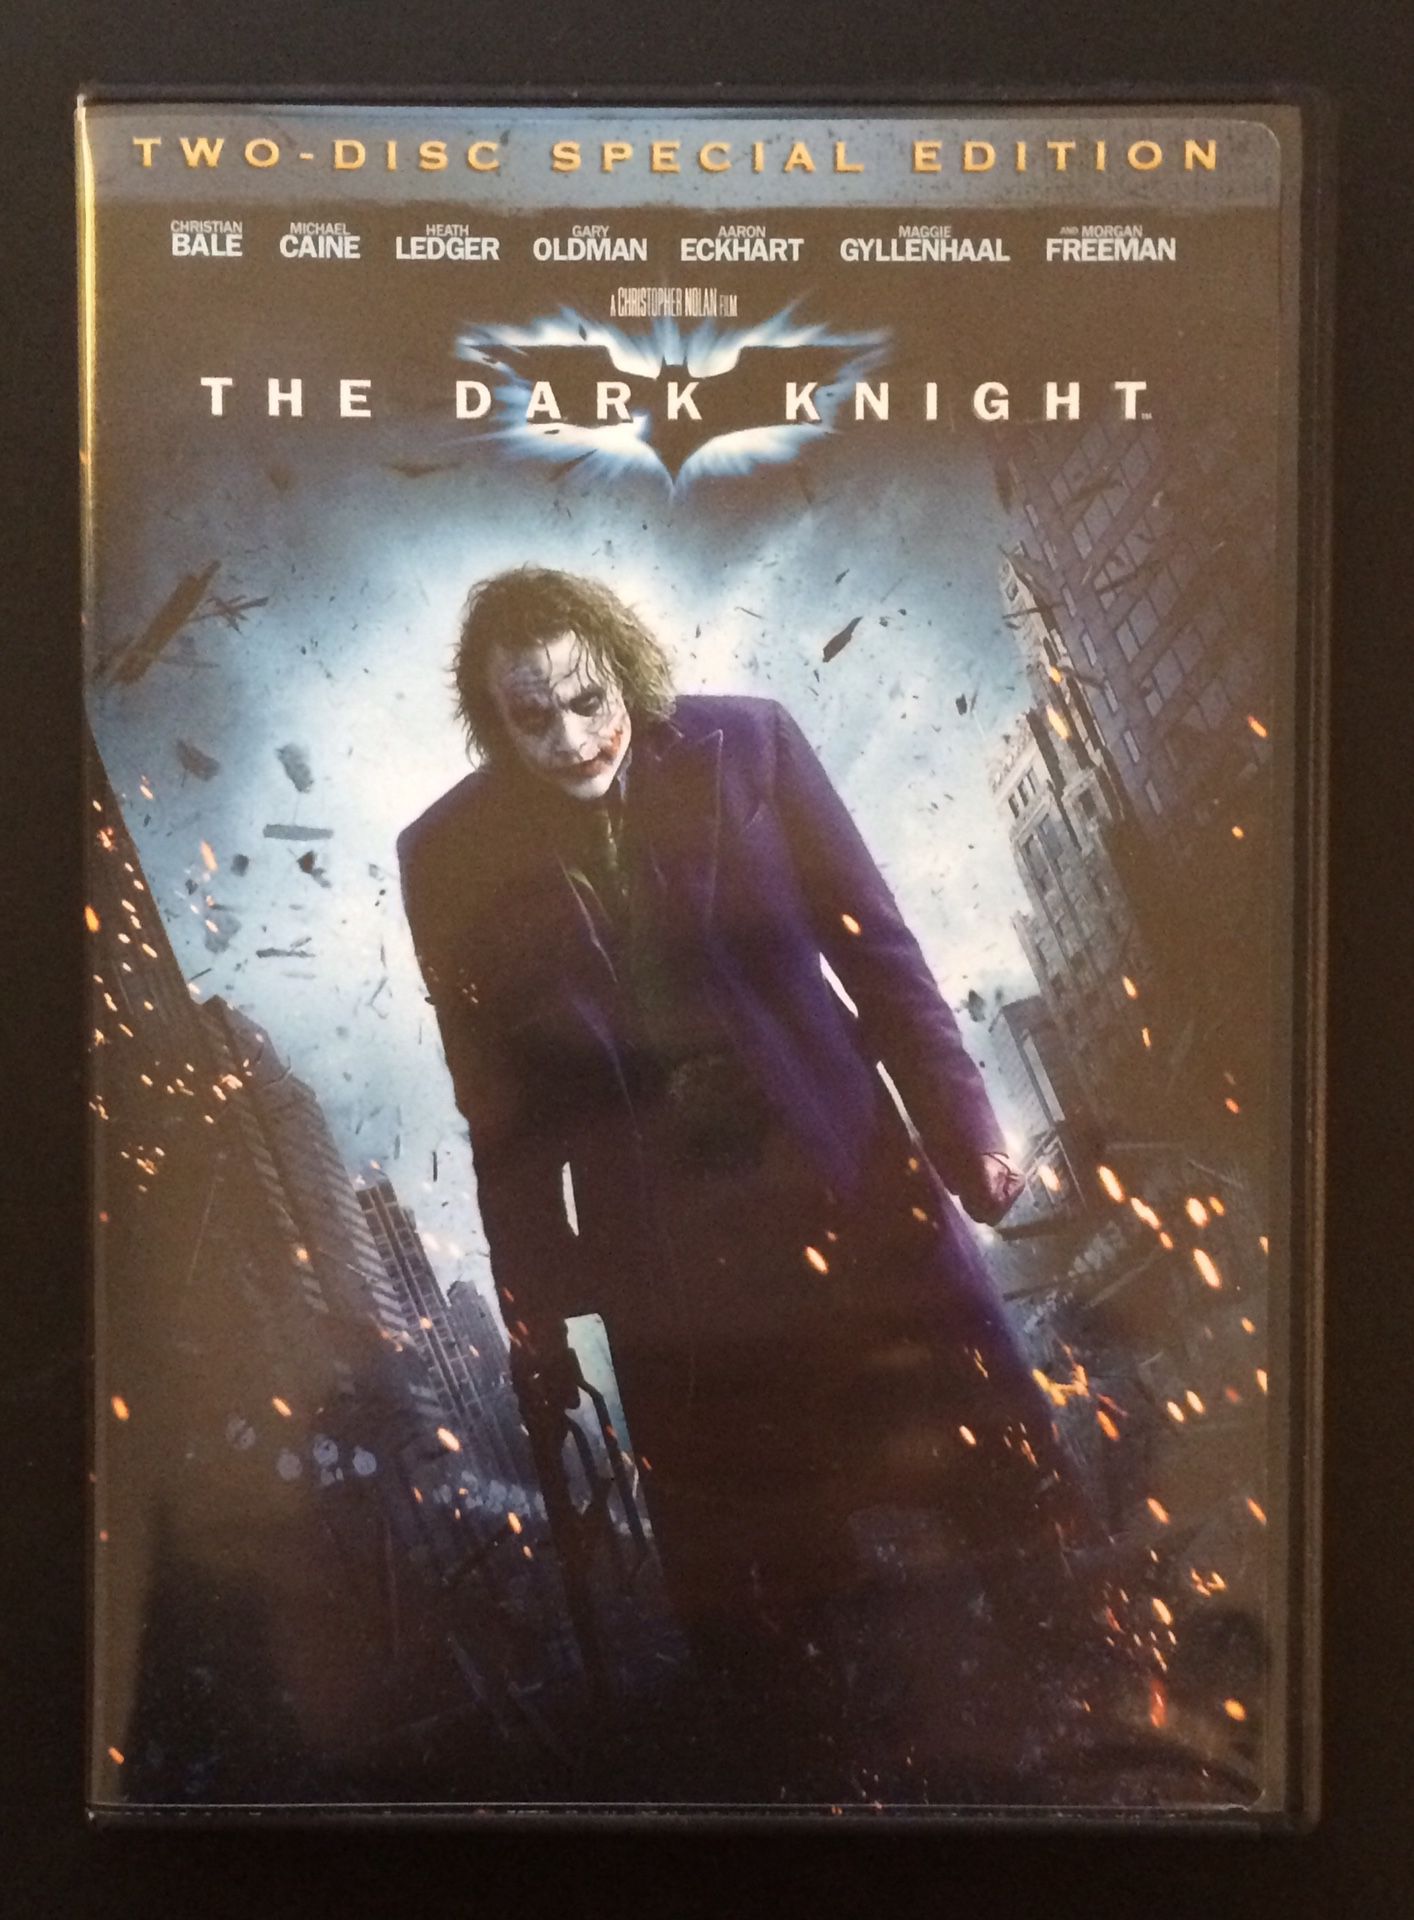 The Dark Knight DVD (two disc special edition)